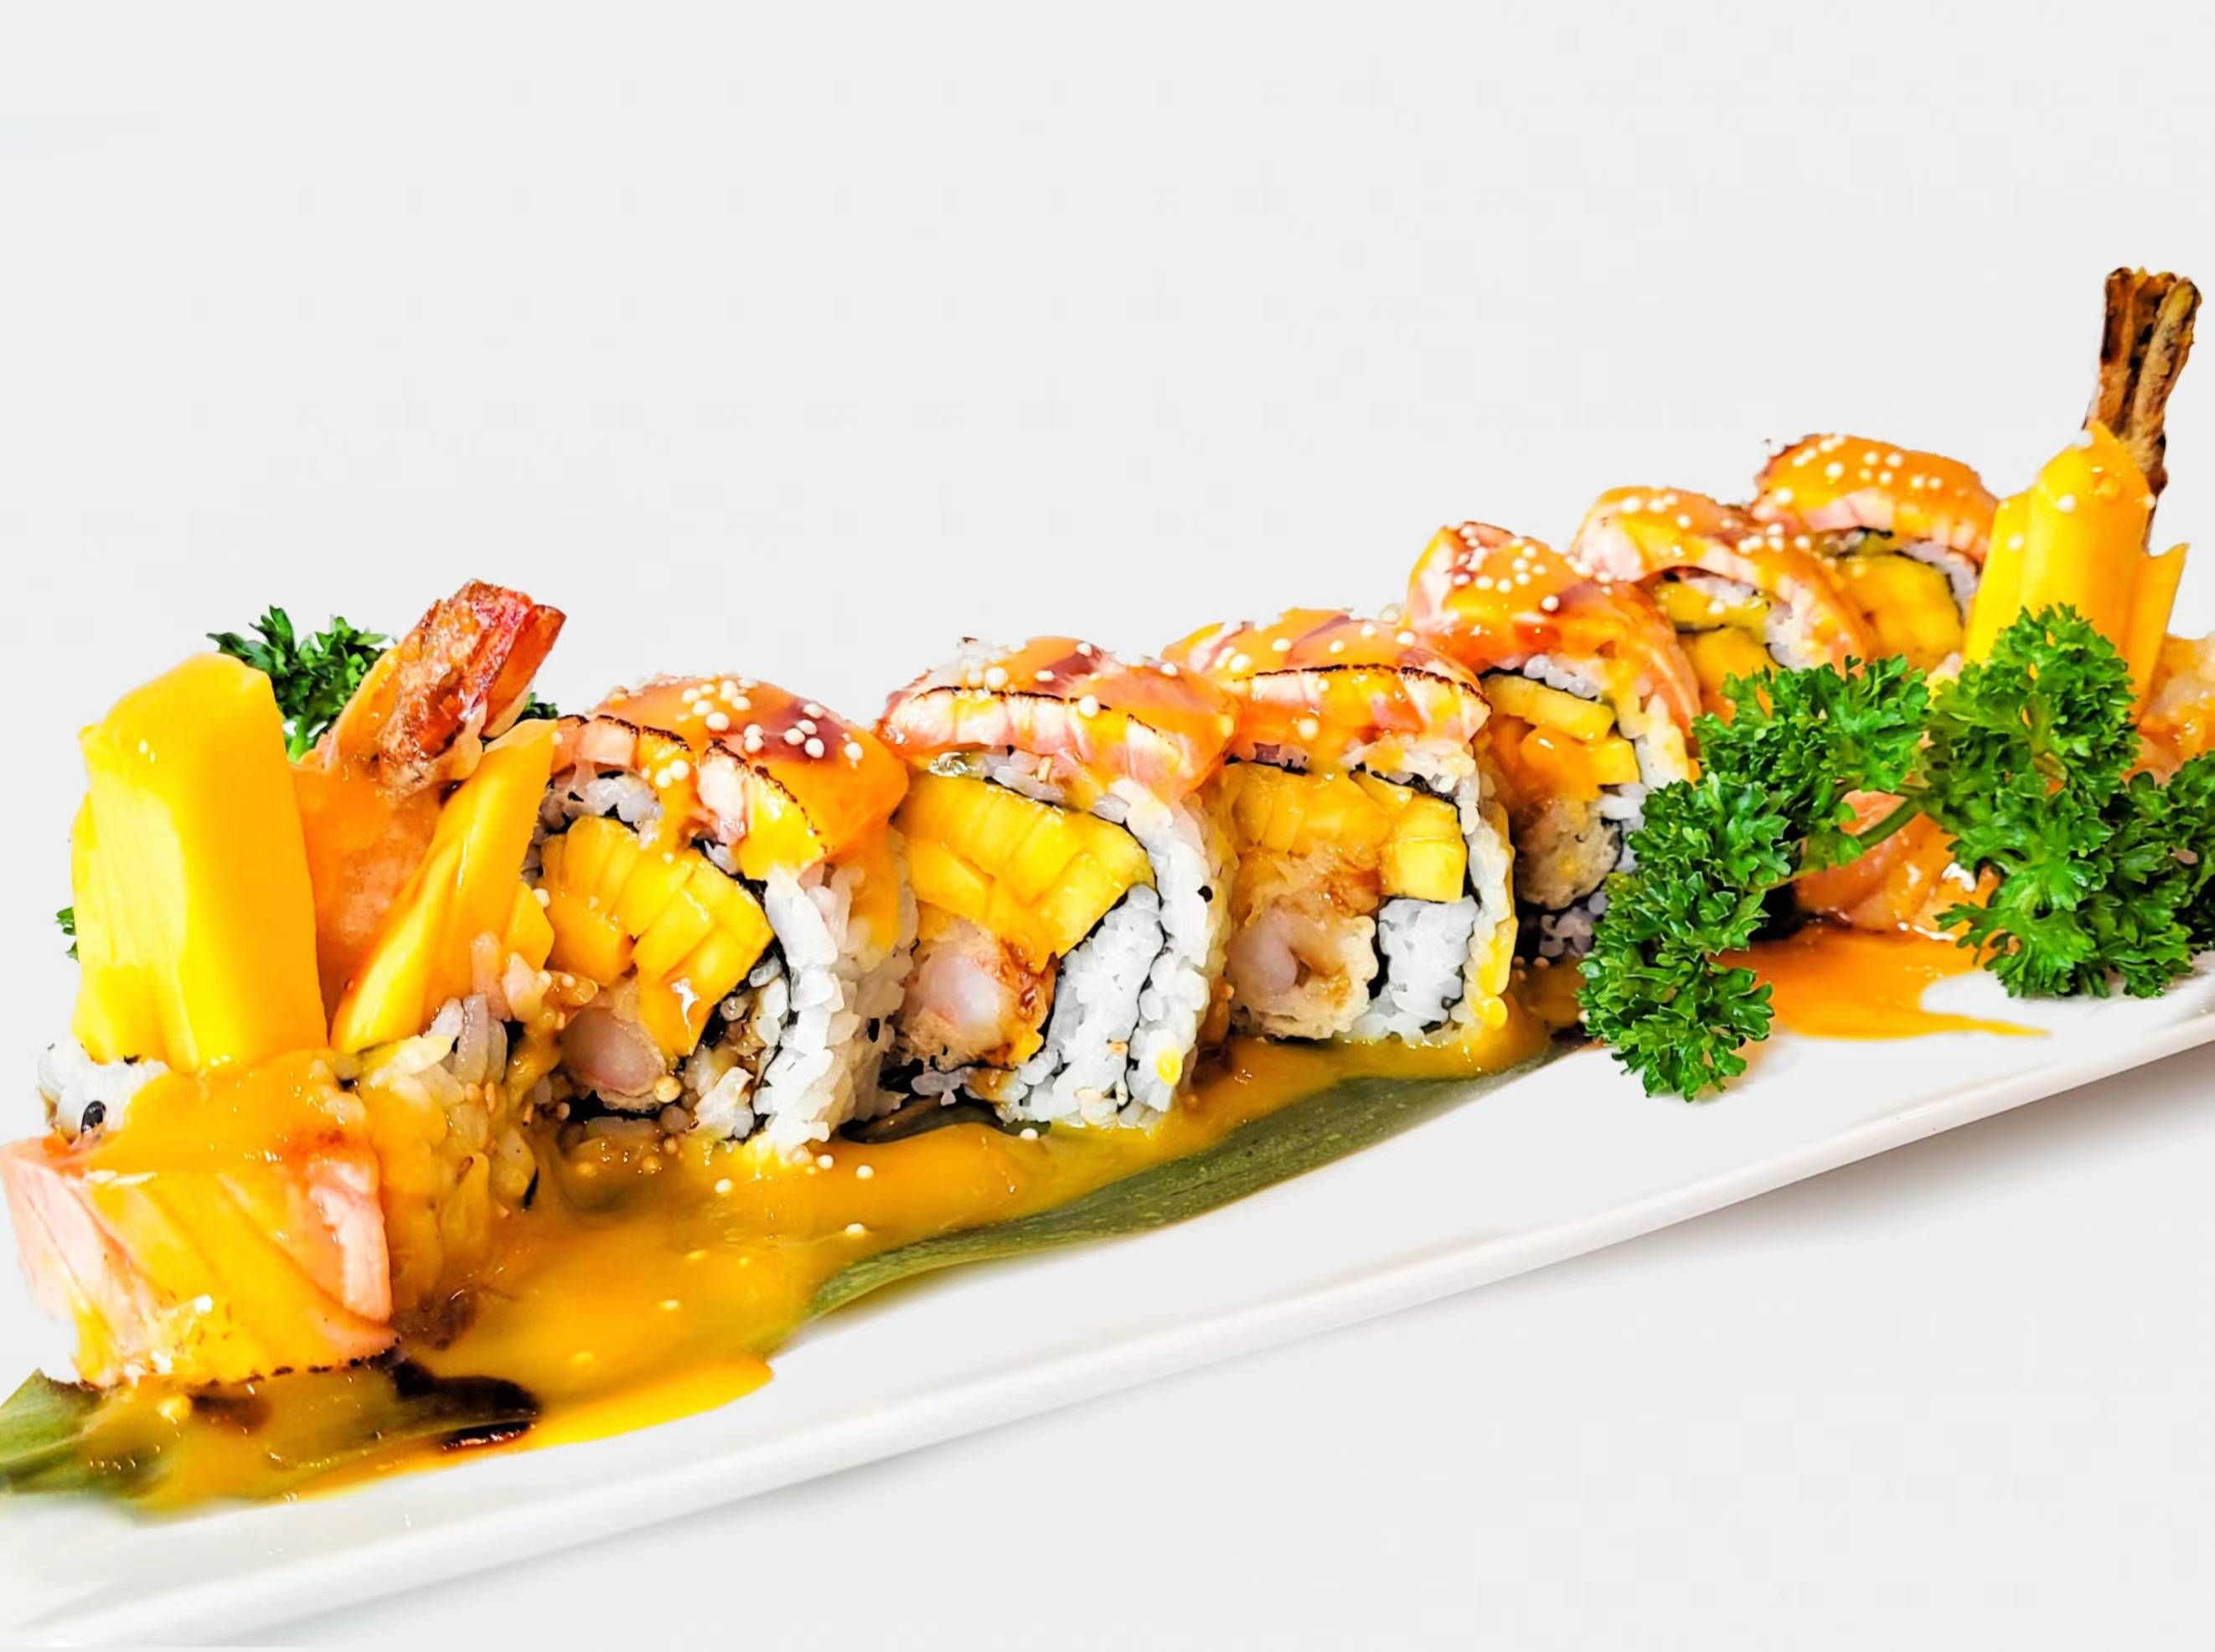 The "G-Dragon" Roll (8pc)